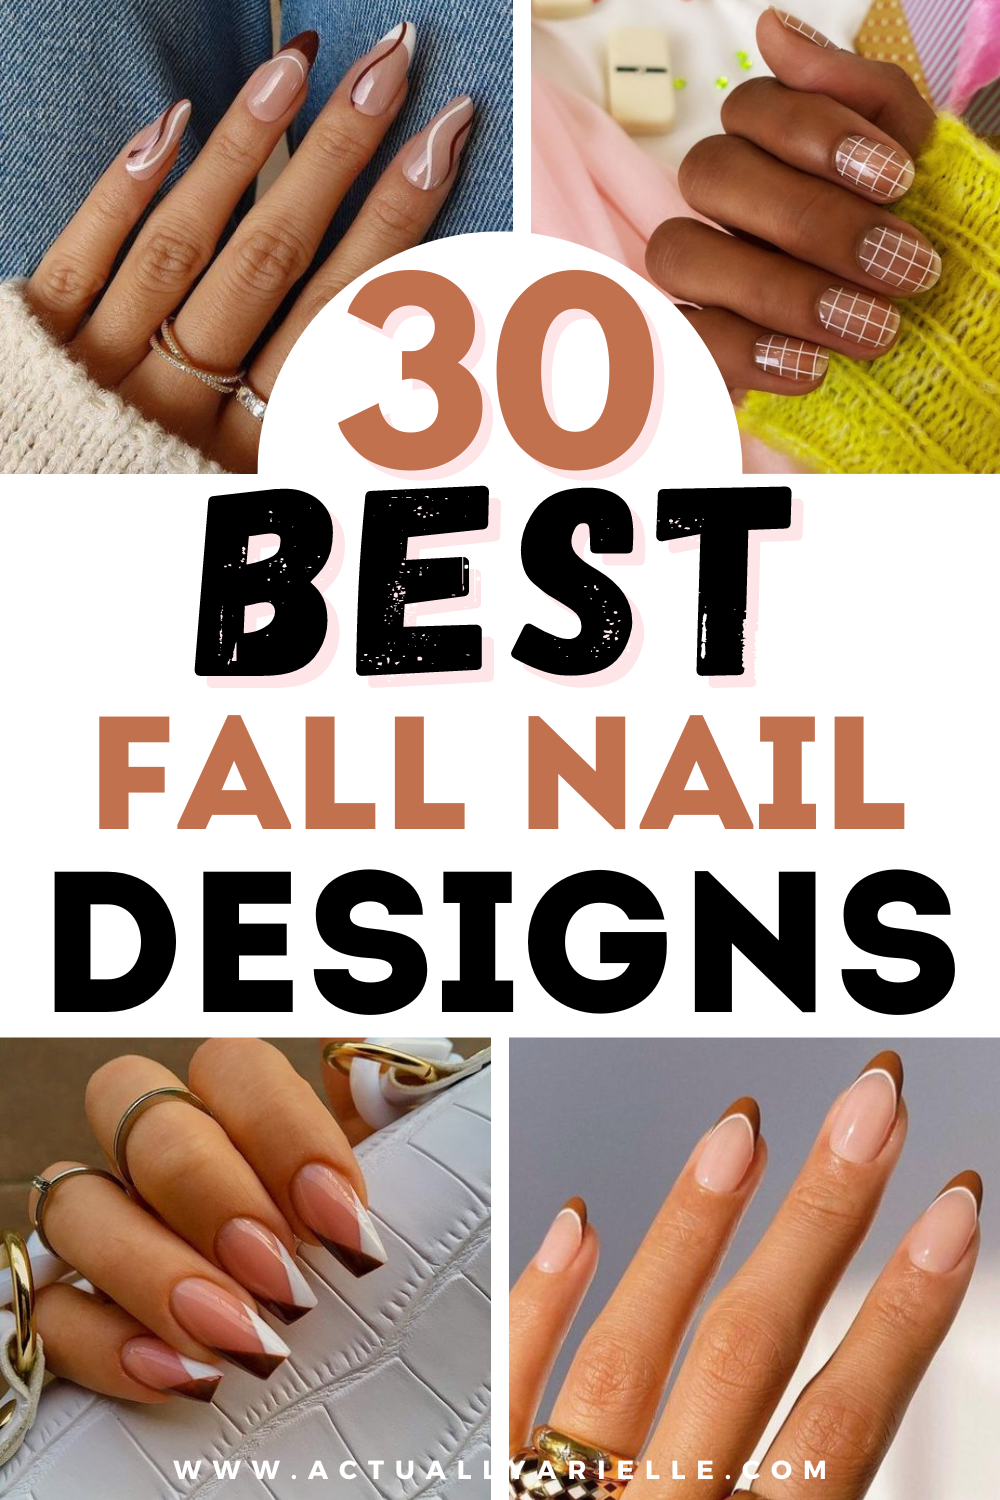 30 Best Simple Fall Nail Designs You'll Love - Actually Arielle